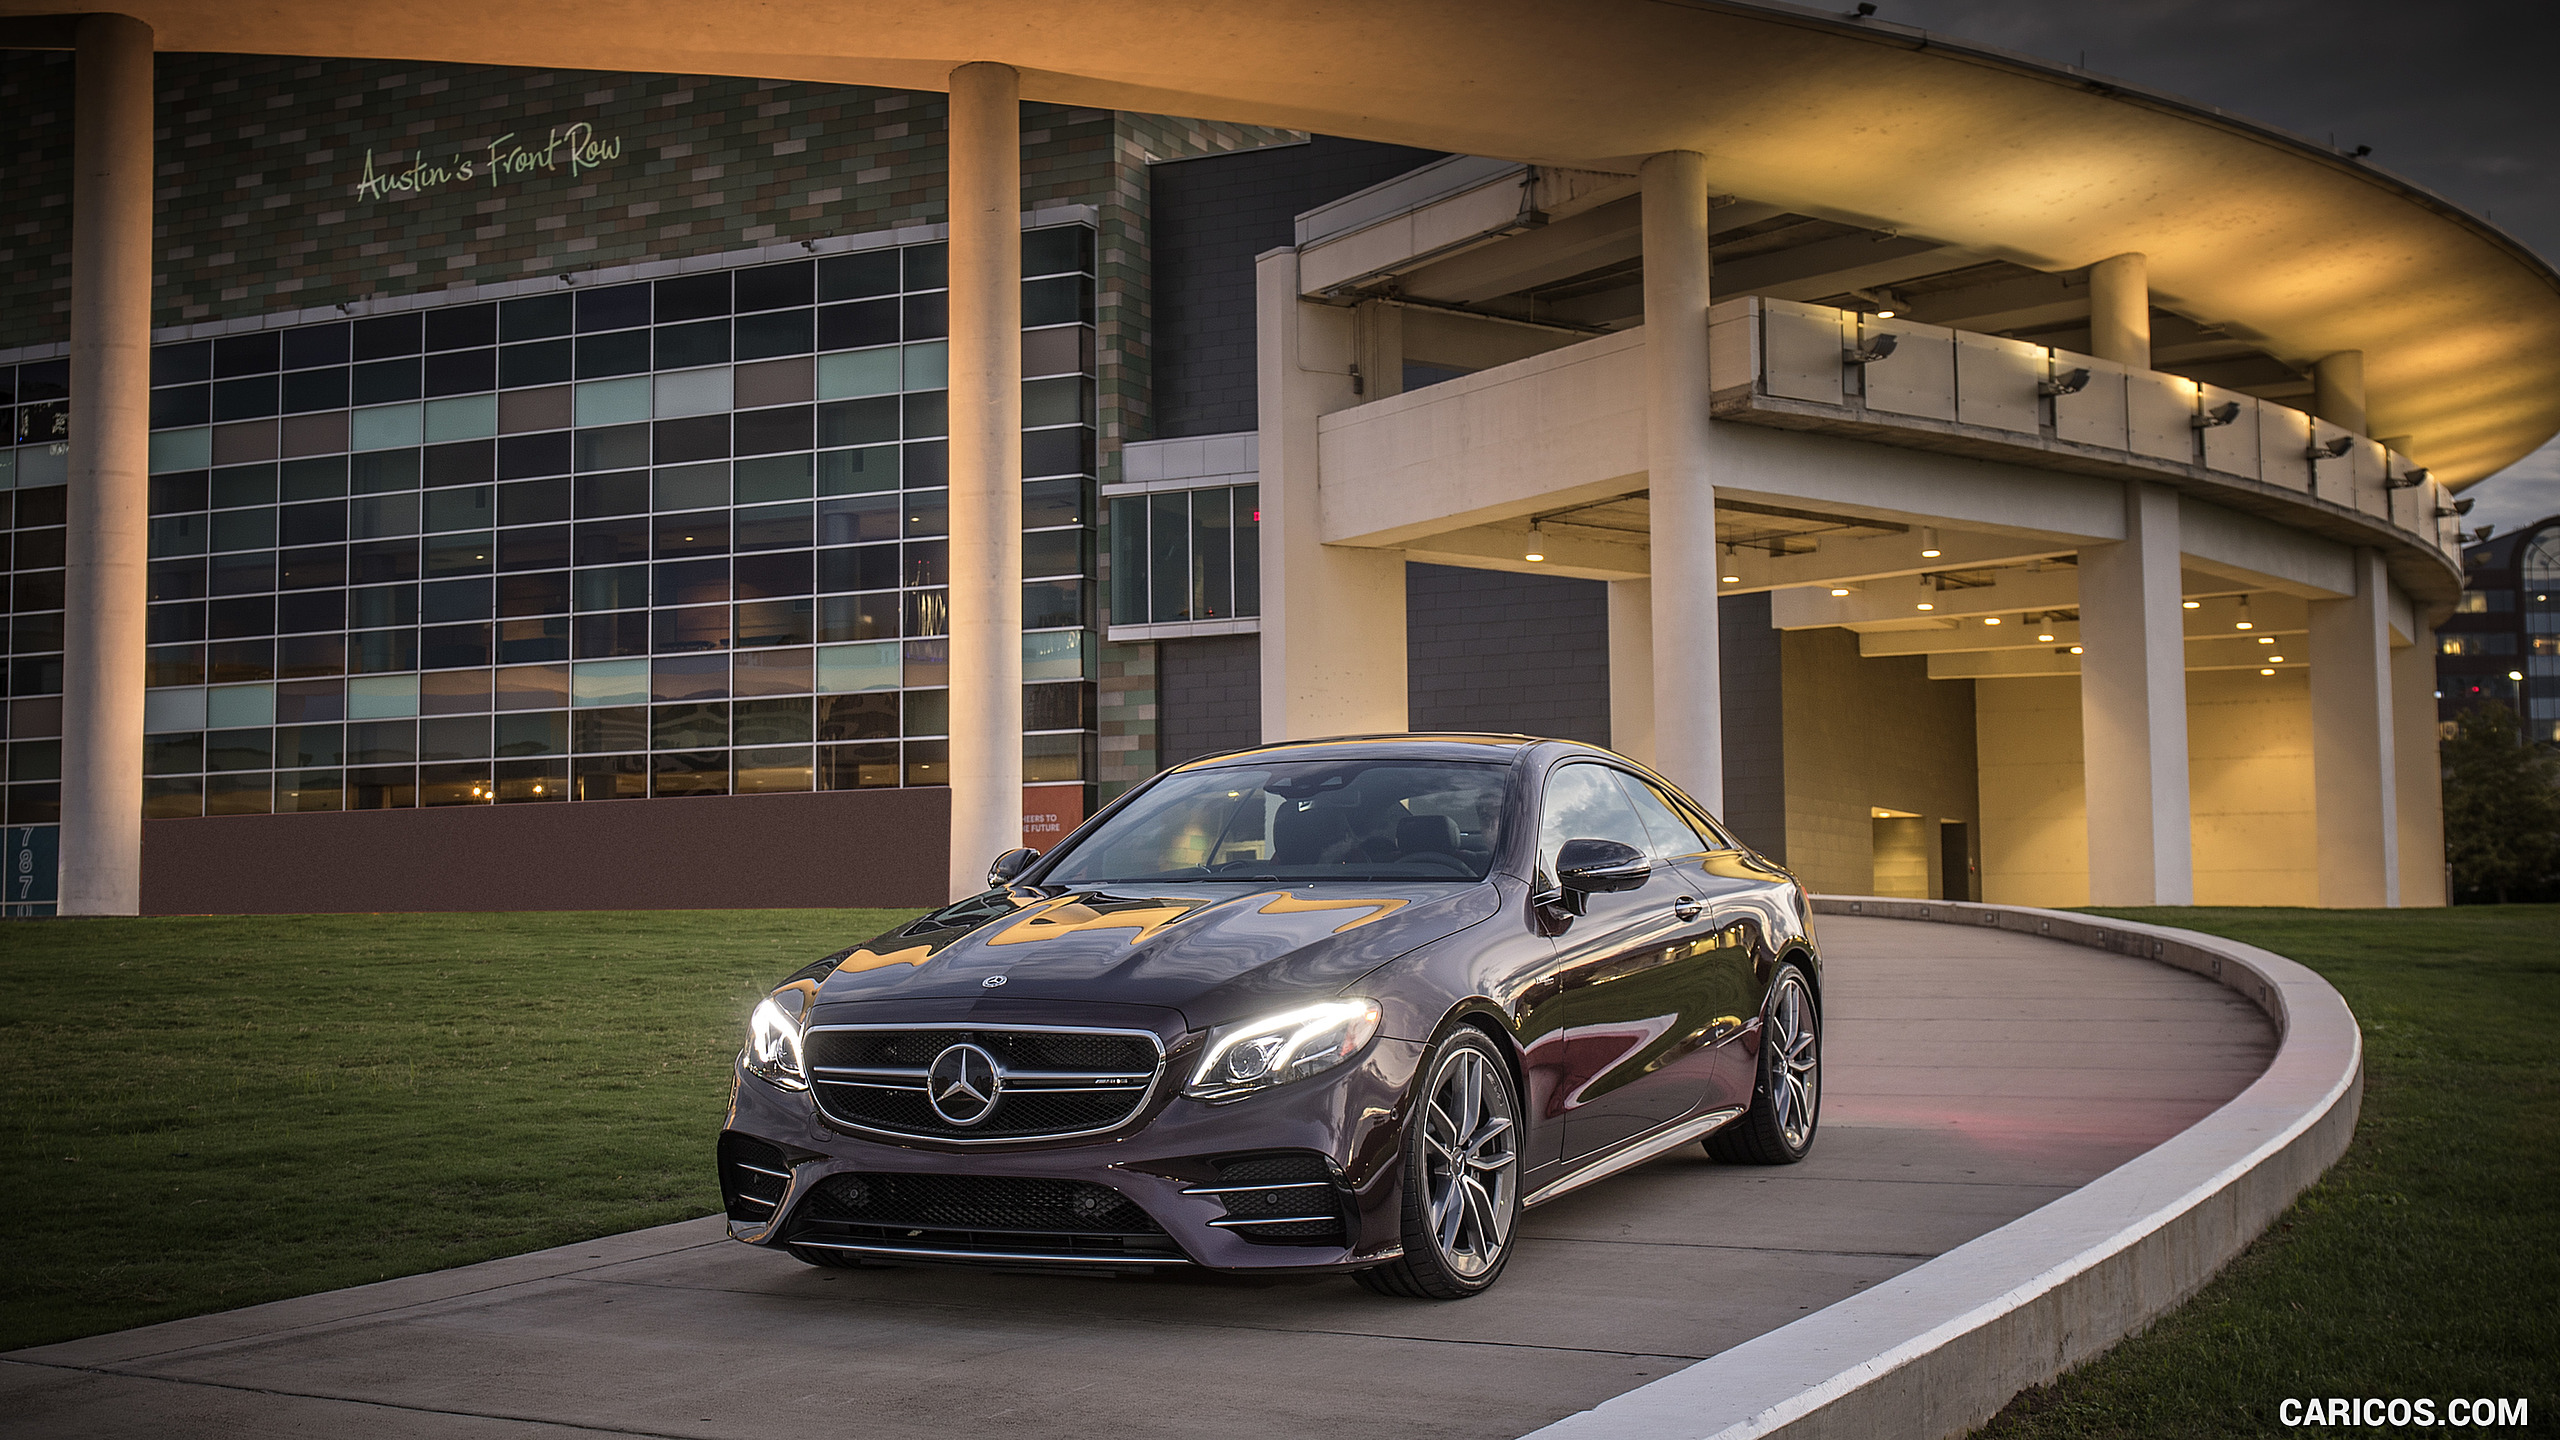 2019 Mercedes-AMG E 53 4MATIC+ Coupe (US-Spec) Wallpaper - Front, #155 of 193